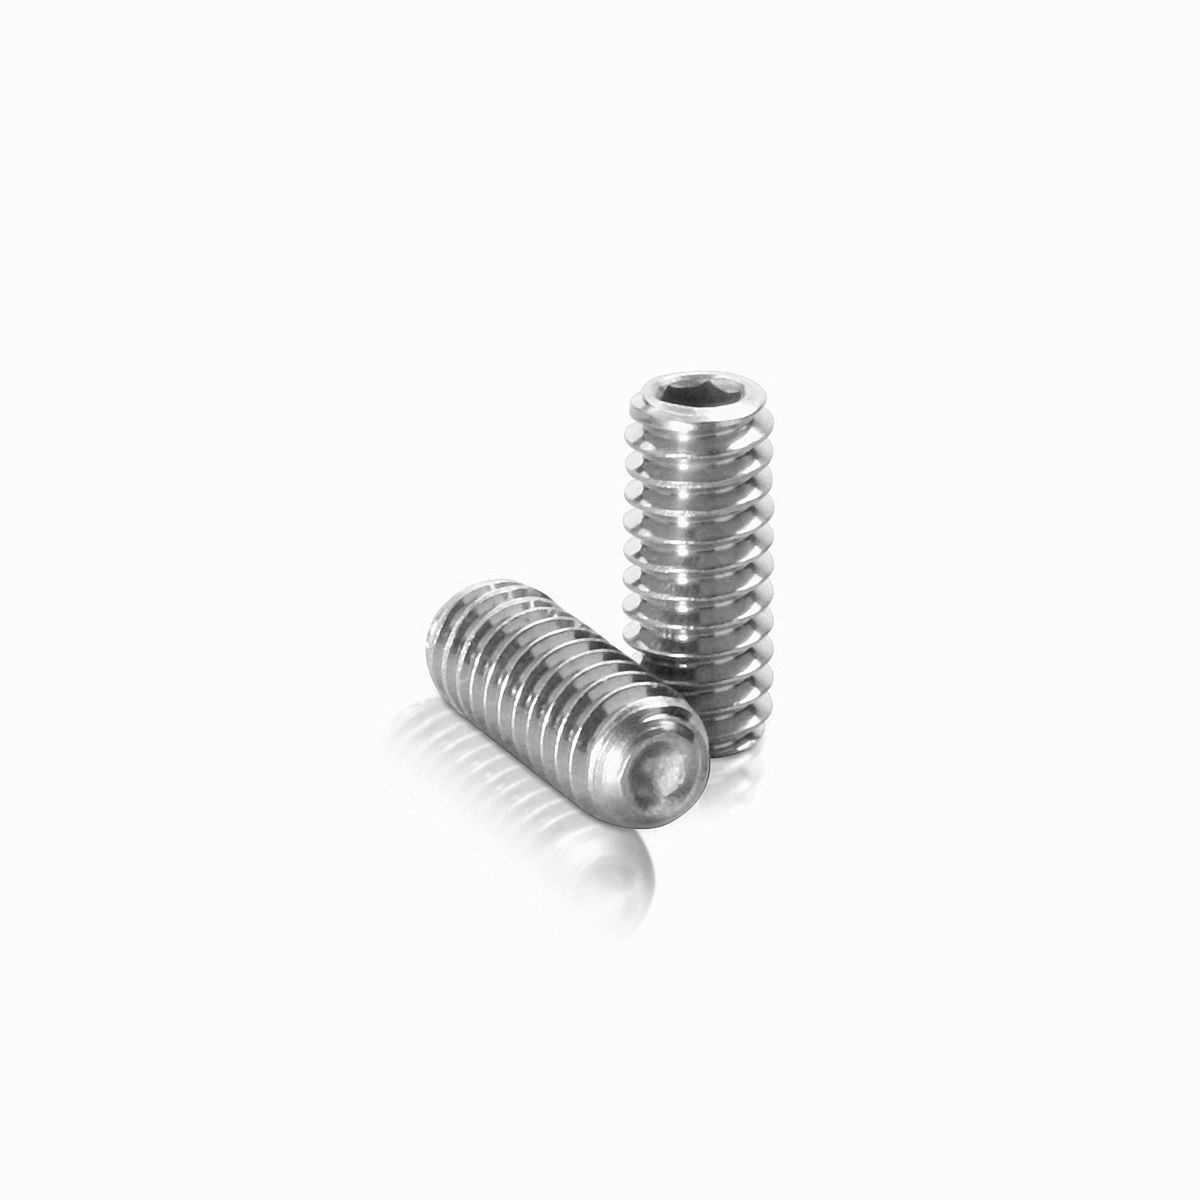 (Set of 4) 1'' Diameter X 1/2'' Barrel Length, (316 Marine Grade) Stainless Steel Brushed Finish. Easy Fasten Standoff with (4) 2216Z Screws and (4) ANC2 Anchors for concrete or drywall and (1) M4 Allen Key (For Inside/Outside use) [Required Material Hole